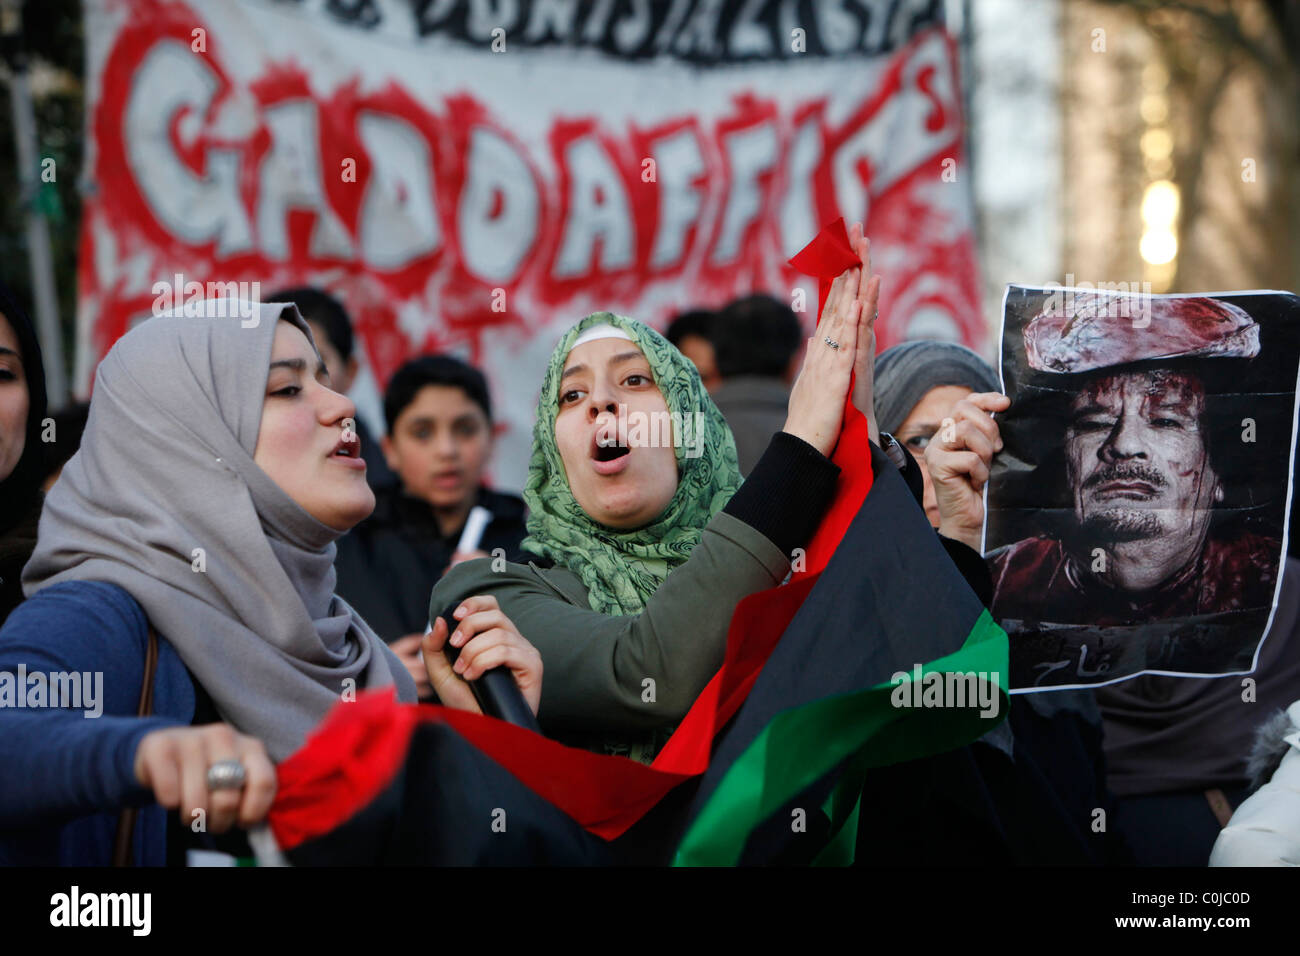 Young Libyan girls at anti-Gaddafi protest in support of a free Libya demonstrate. Stock Photo